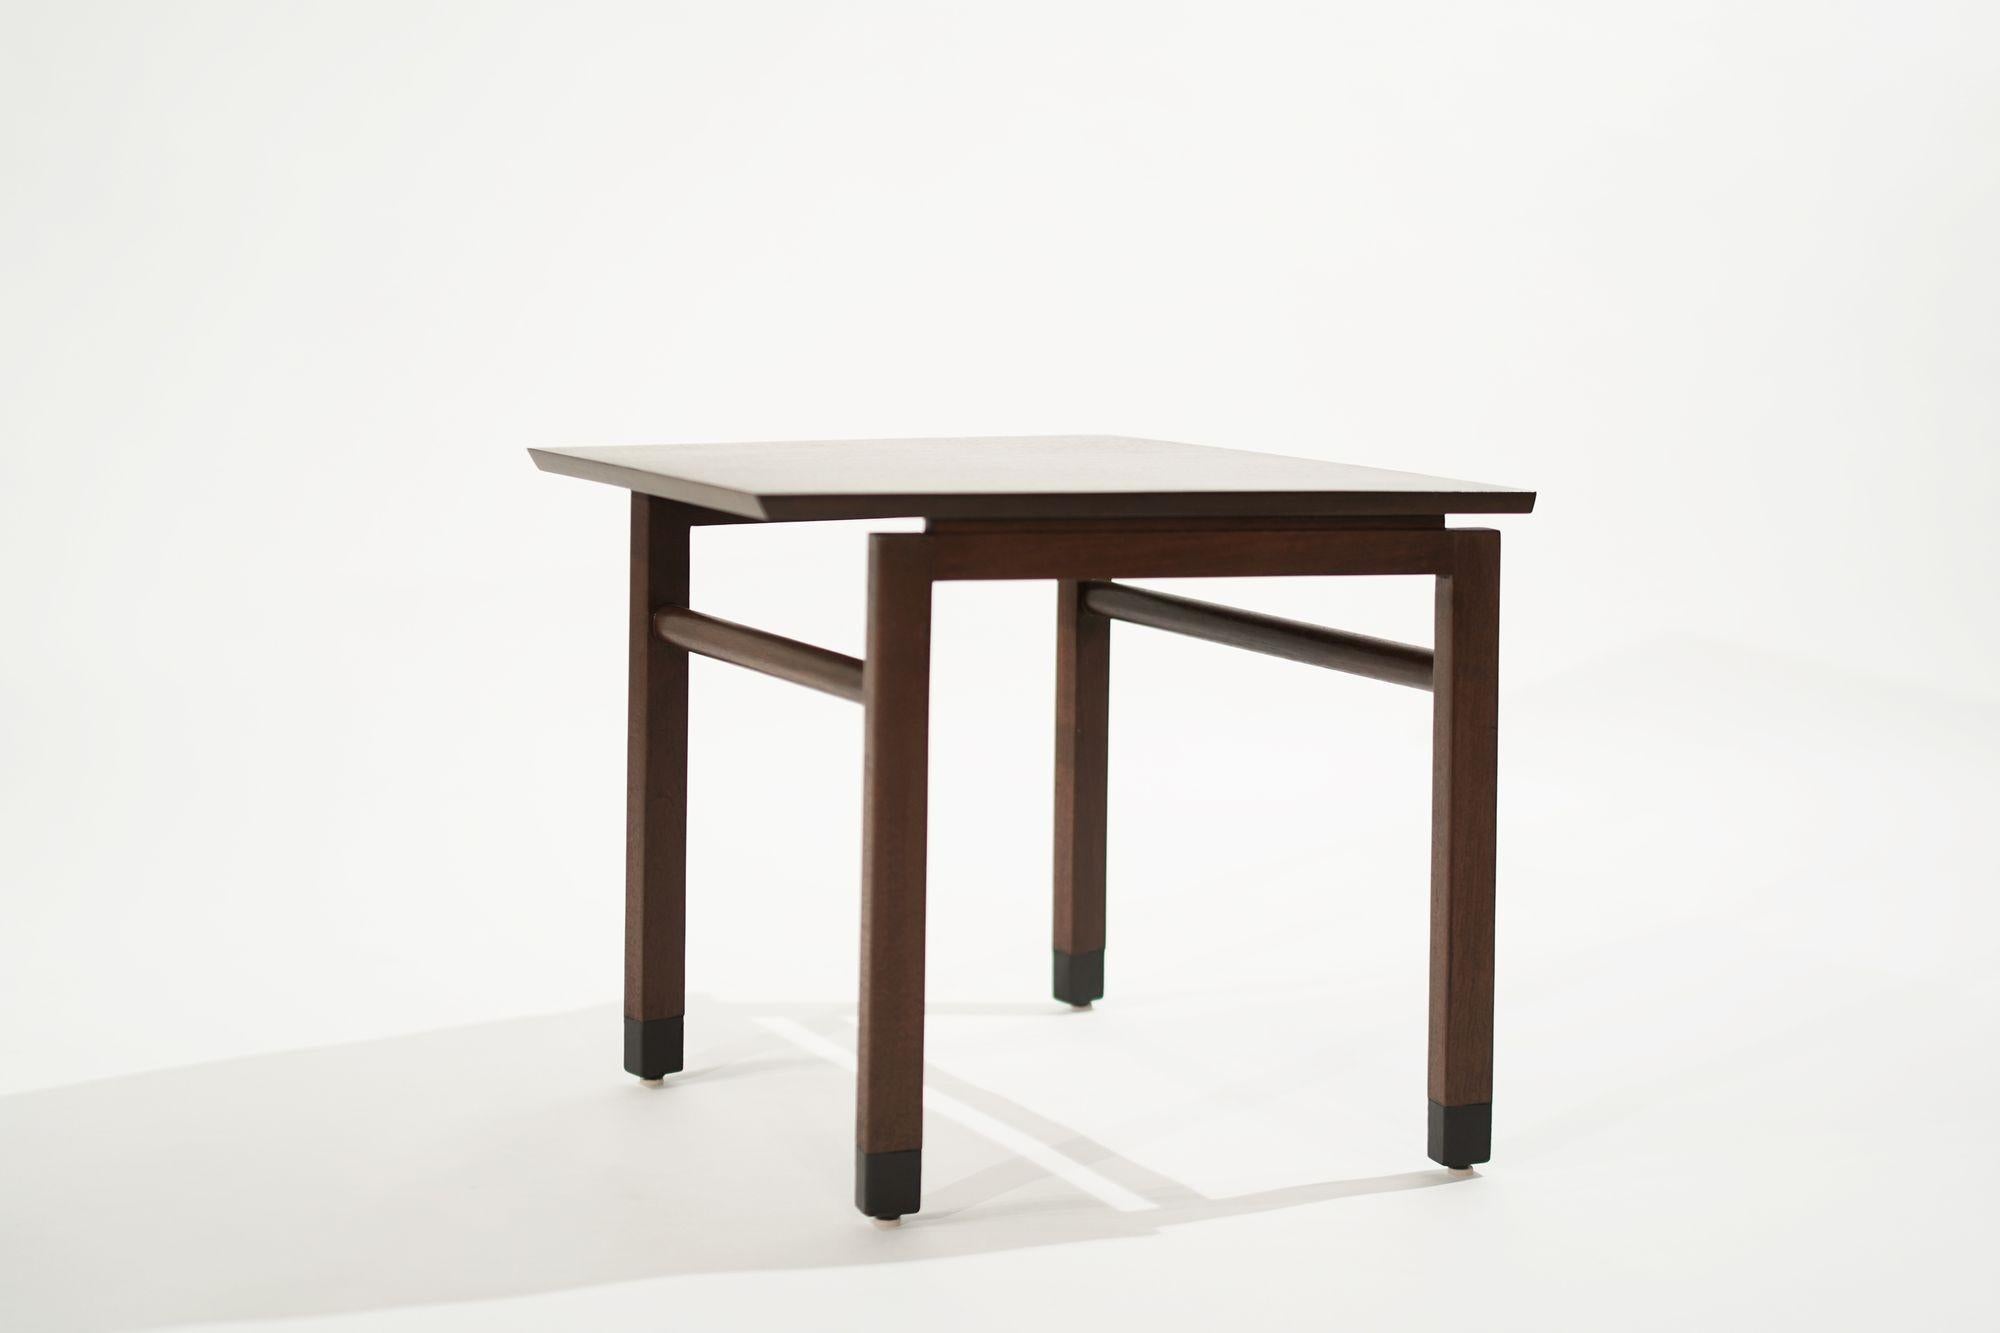 The rarely found Wedge end table designed by Edward Wormely for Dunbar, circa 1950-1959. Executed in walnut, features leather-wrapped feet. completely restored.
 
Other designers from this period include Paul McCobb, Vladimir Kagan, Hans Wegner,